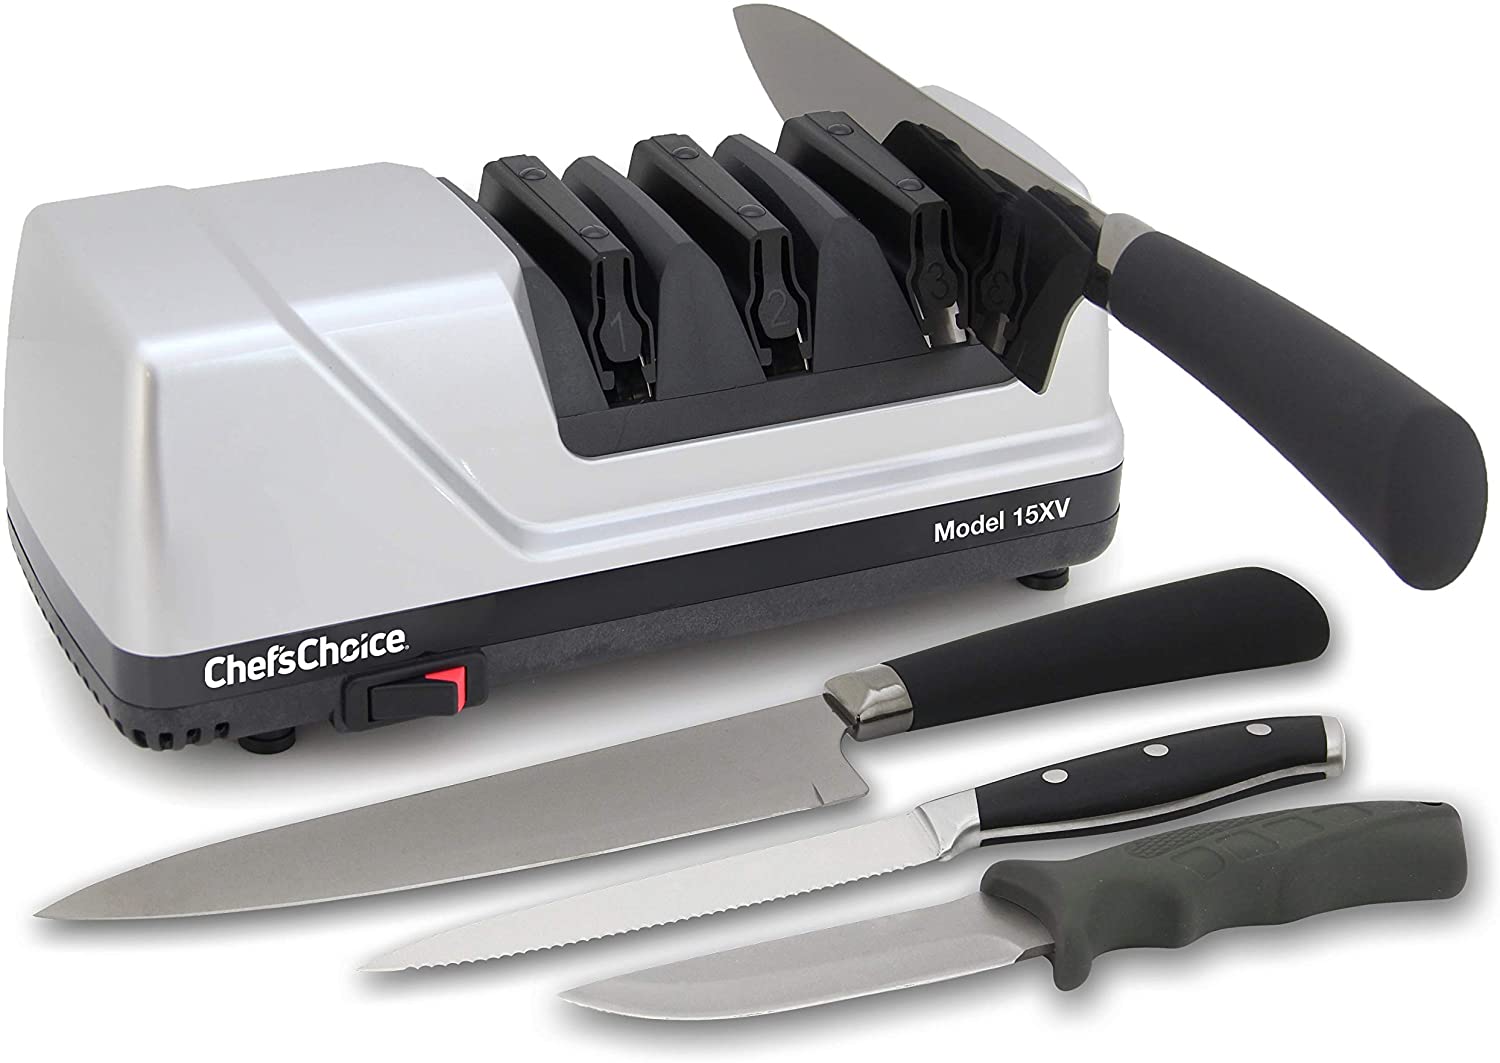 Chef'sChoice Trizor XV EdgeSelect Professional Electric Knife Sharpening System w/ Free Prime Shipping $99